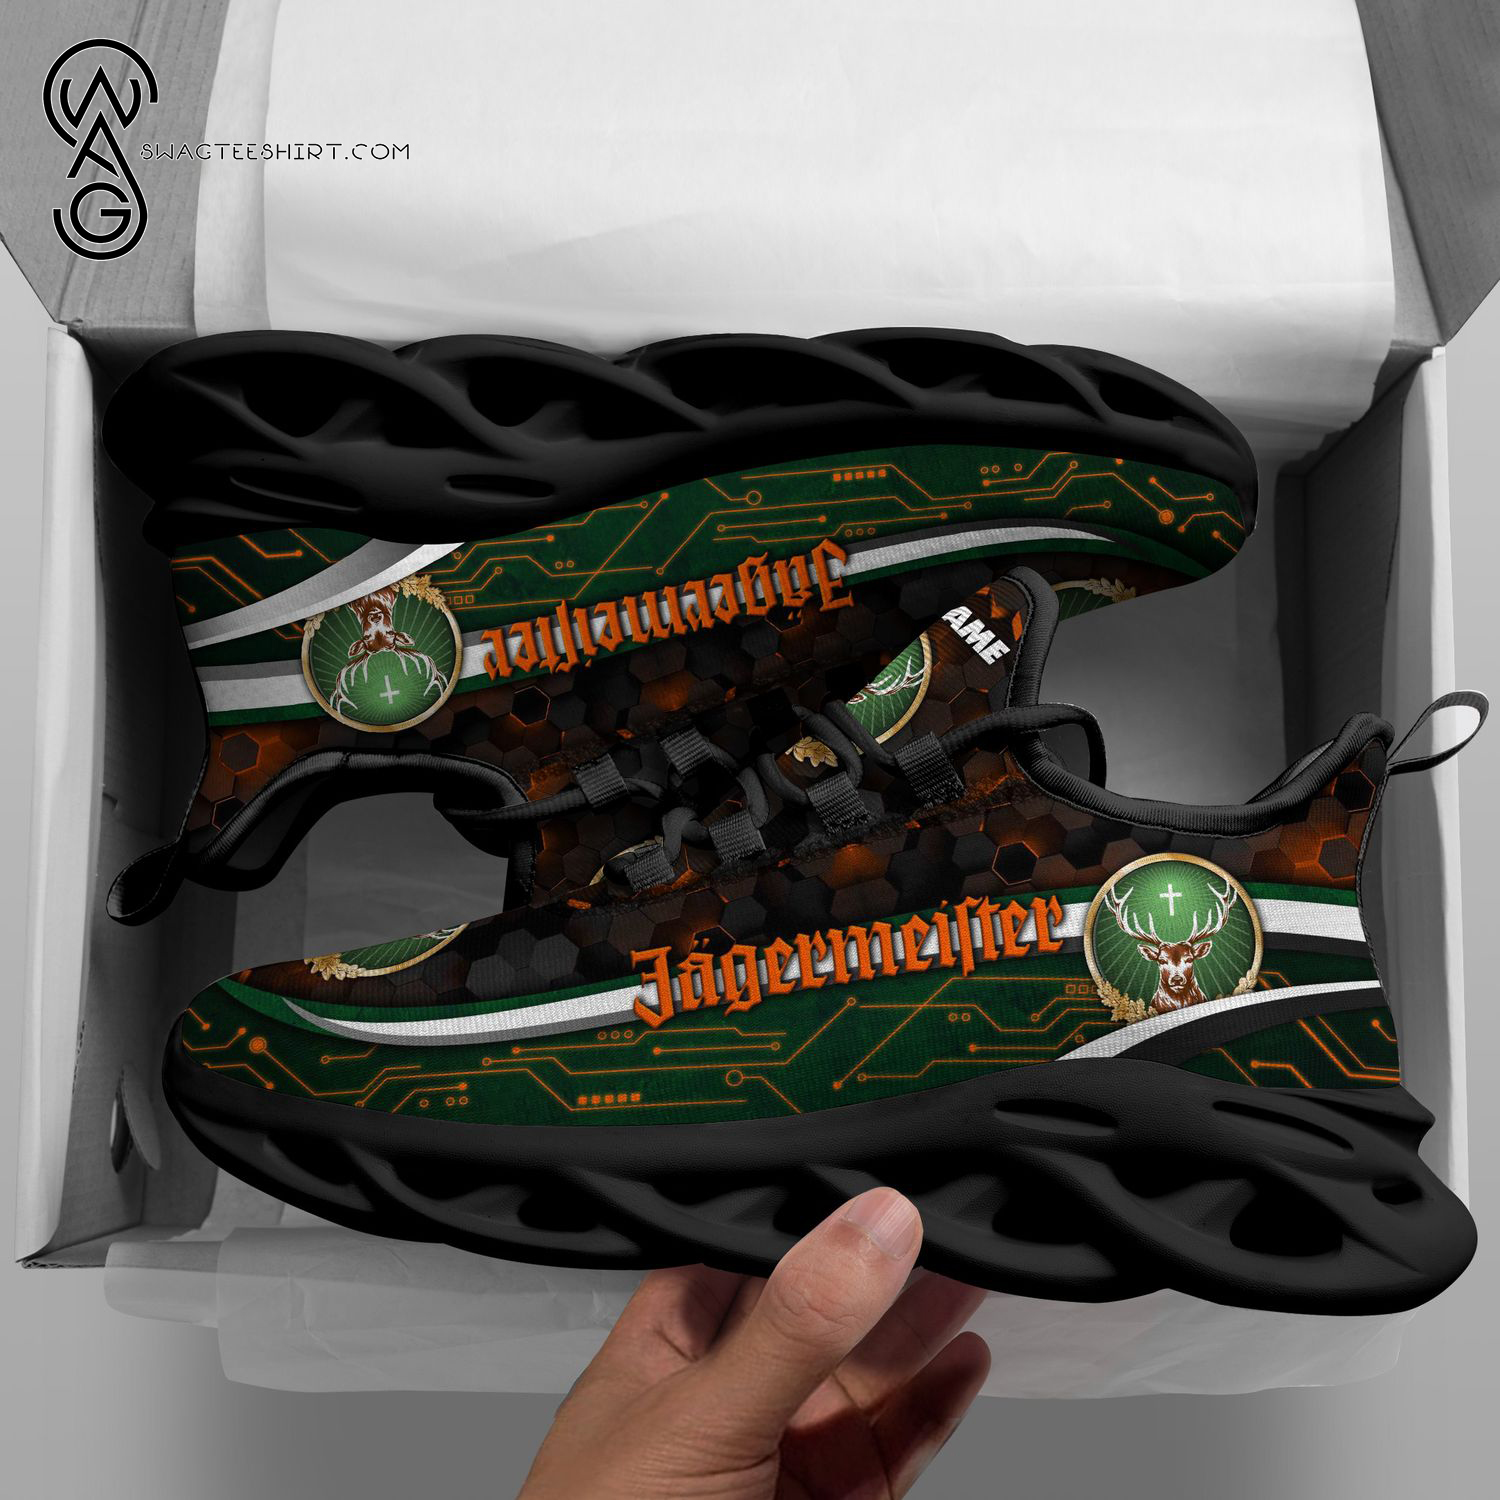 Custom Jagermeister Germany Max Soul Shoes